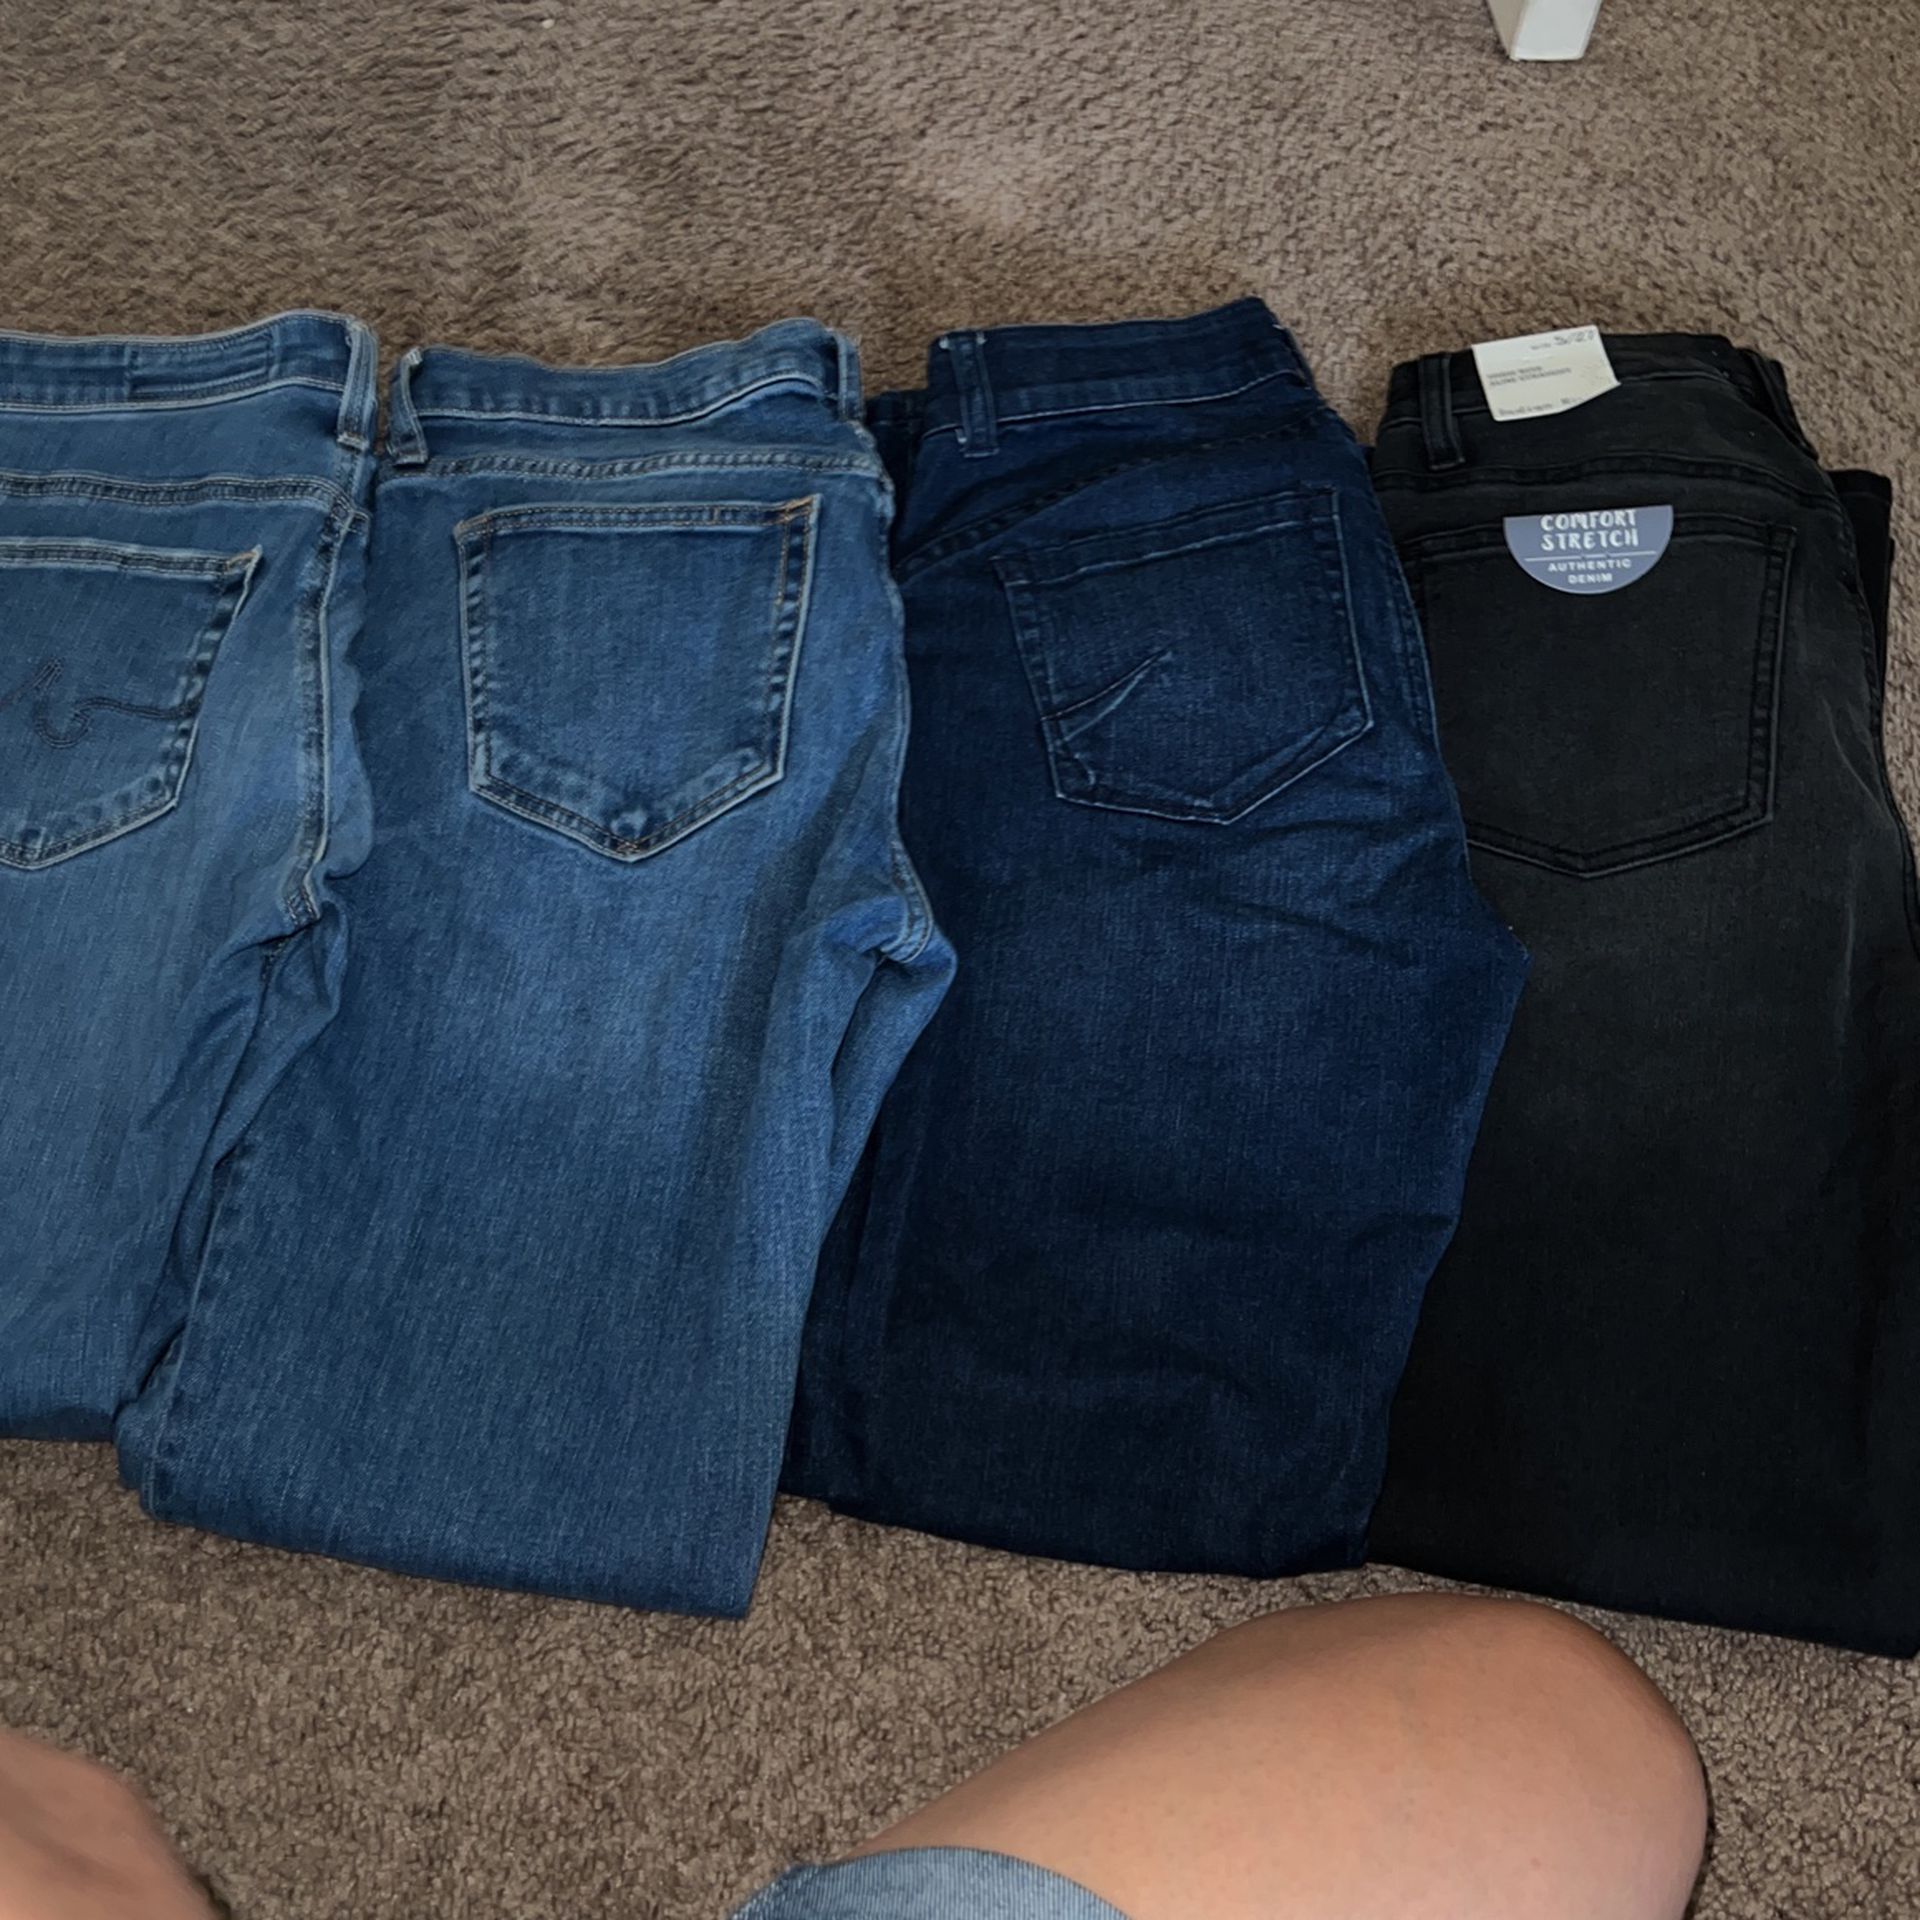 4 Pair Of Jeans  Size 4,5,6